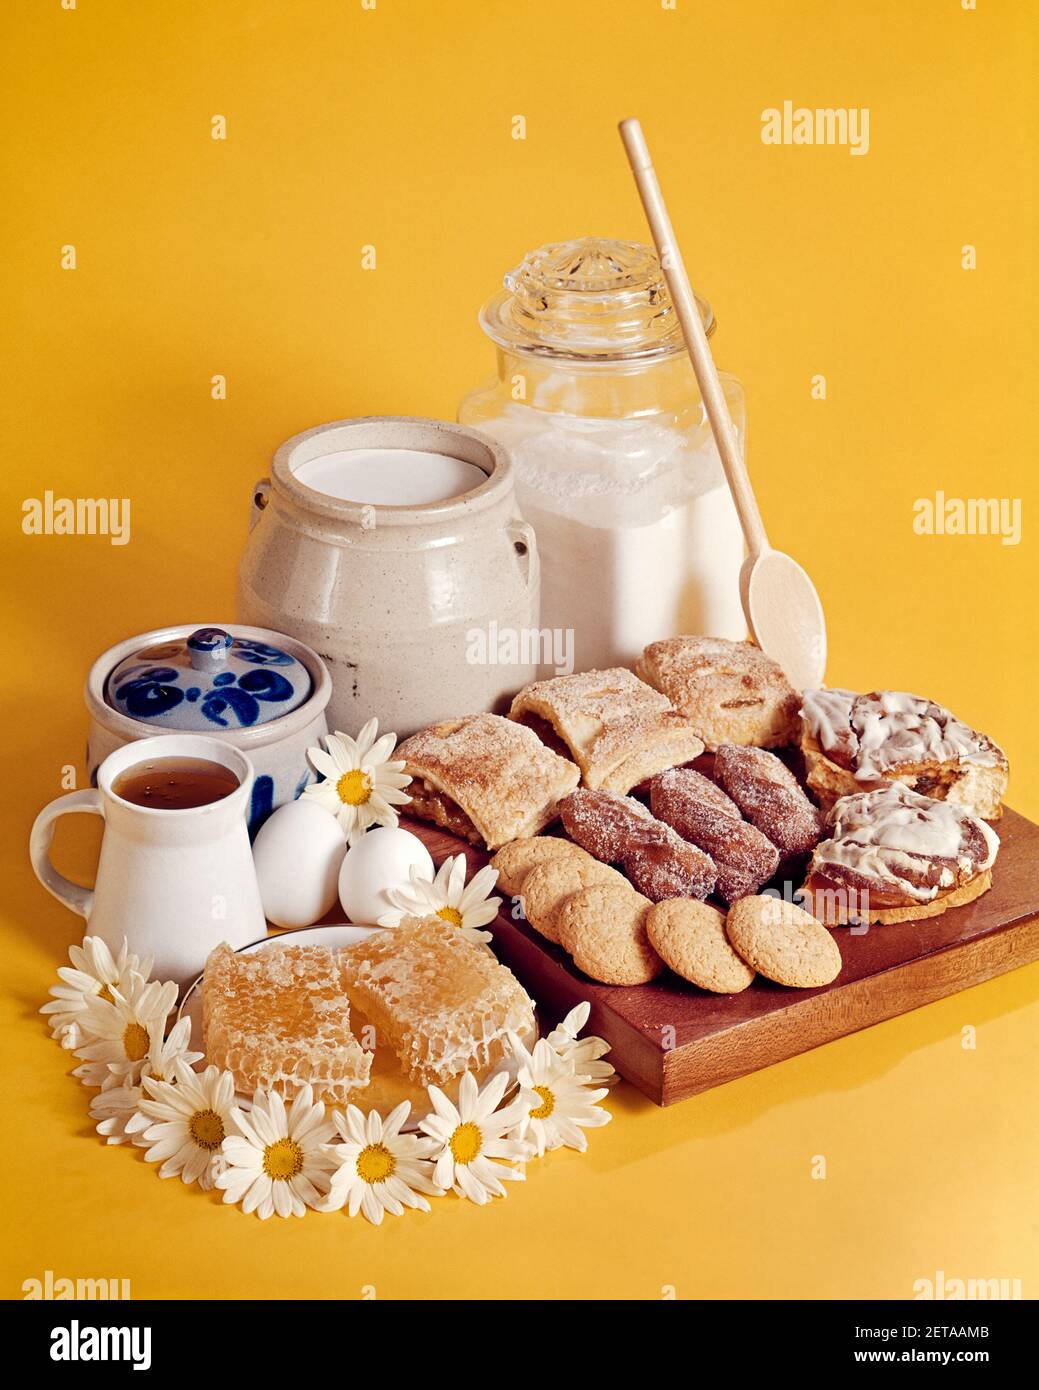 1970s FINISHED BAKED BREAKFAST PASTRIES ON A WOOD BLOCK SURROUNDED BY WOODEN SPOON AND INGREDIENTS FLOUR MILK HONEY EGGS SUGAR - kf8553 PHT001 HARS OLD FASHIONED Stock Photo